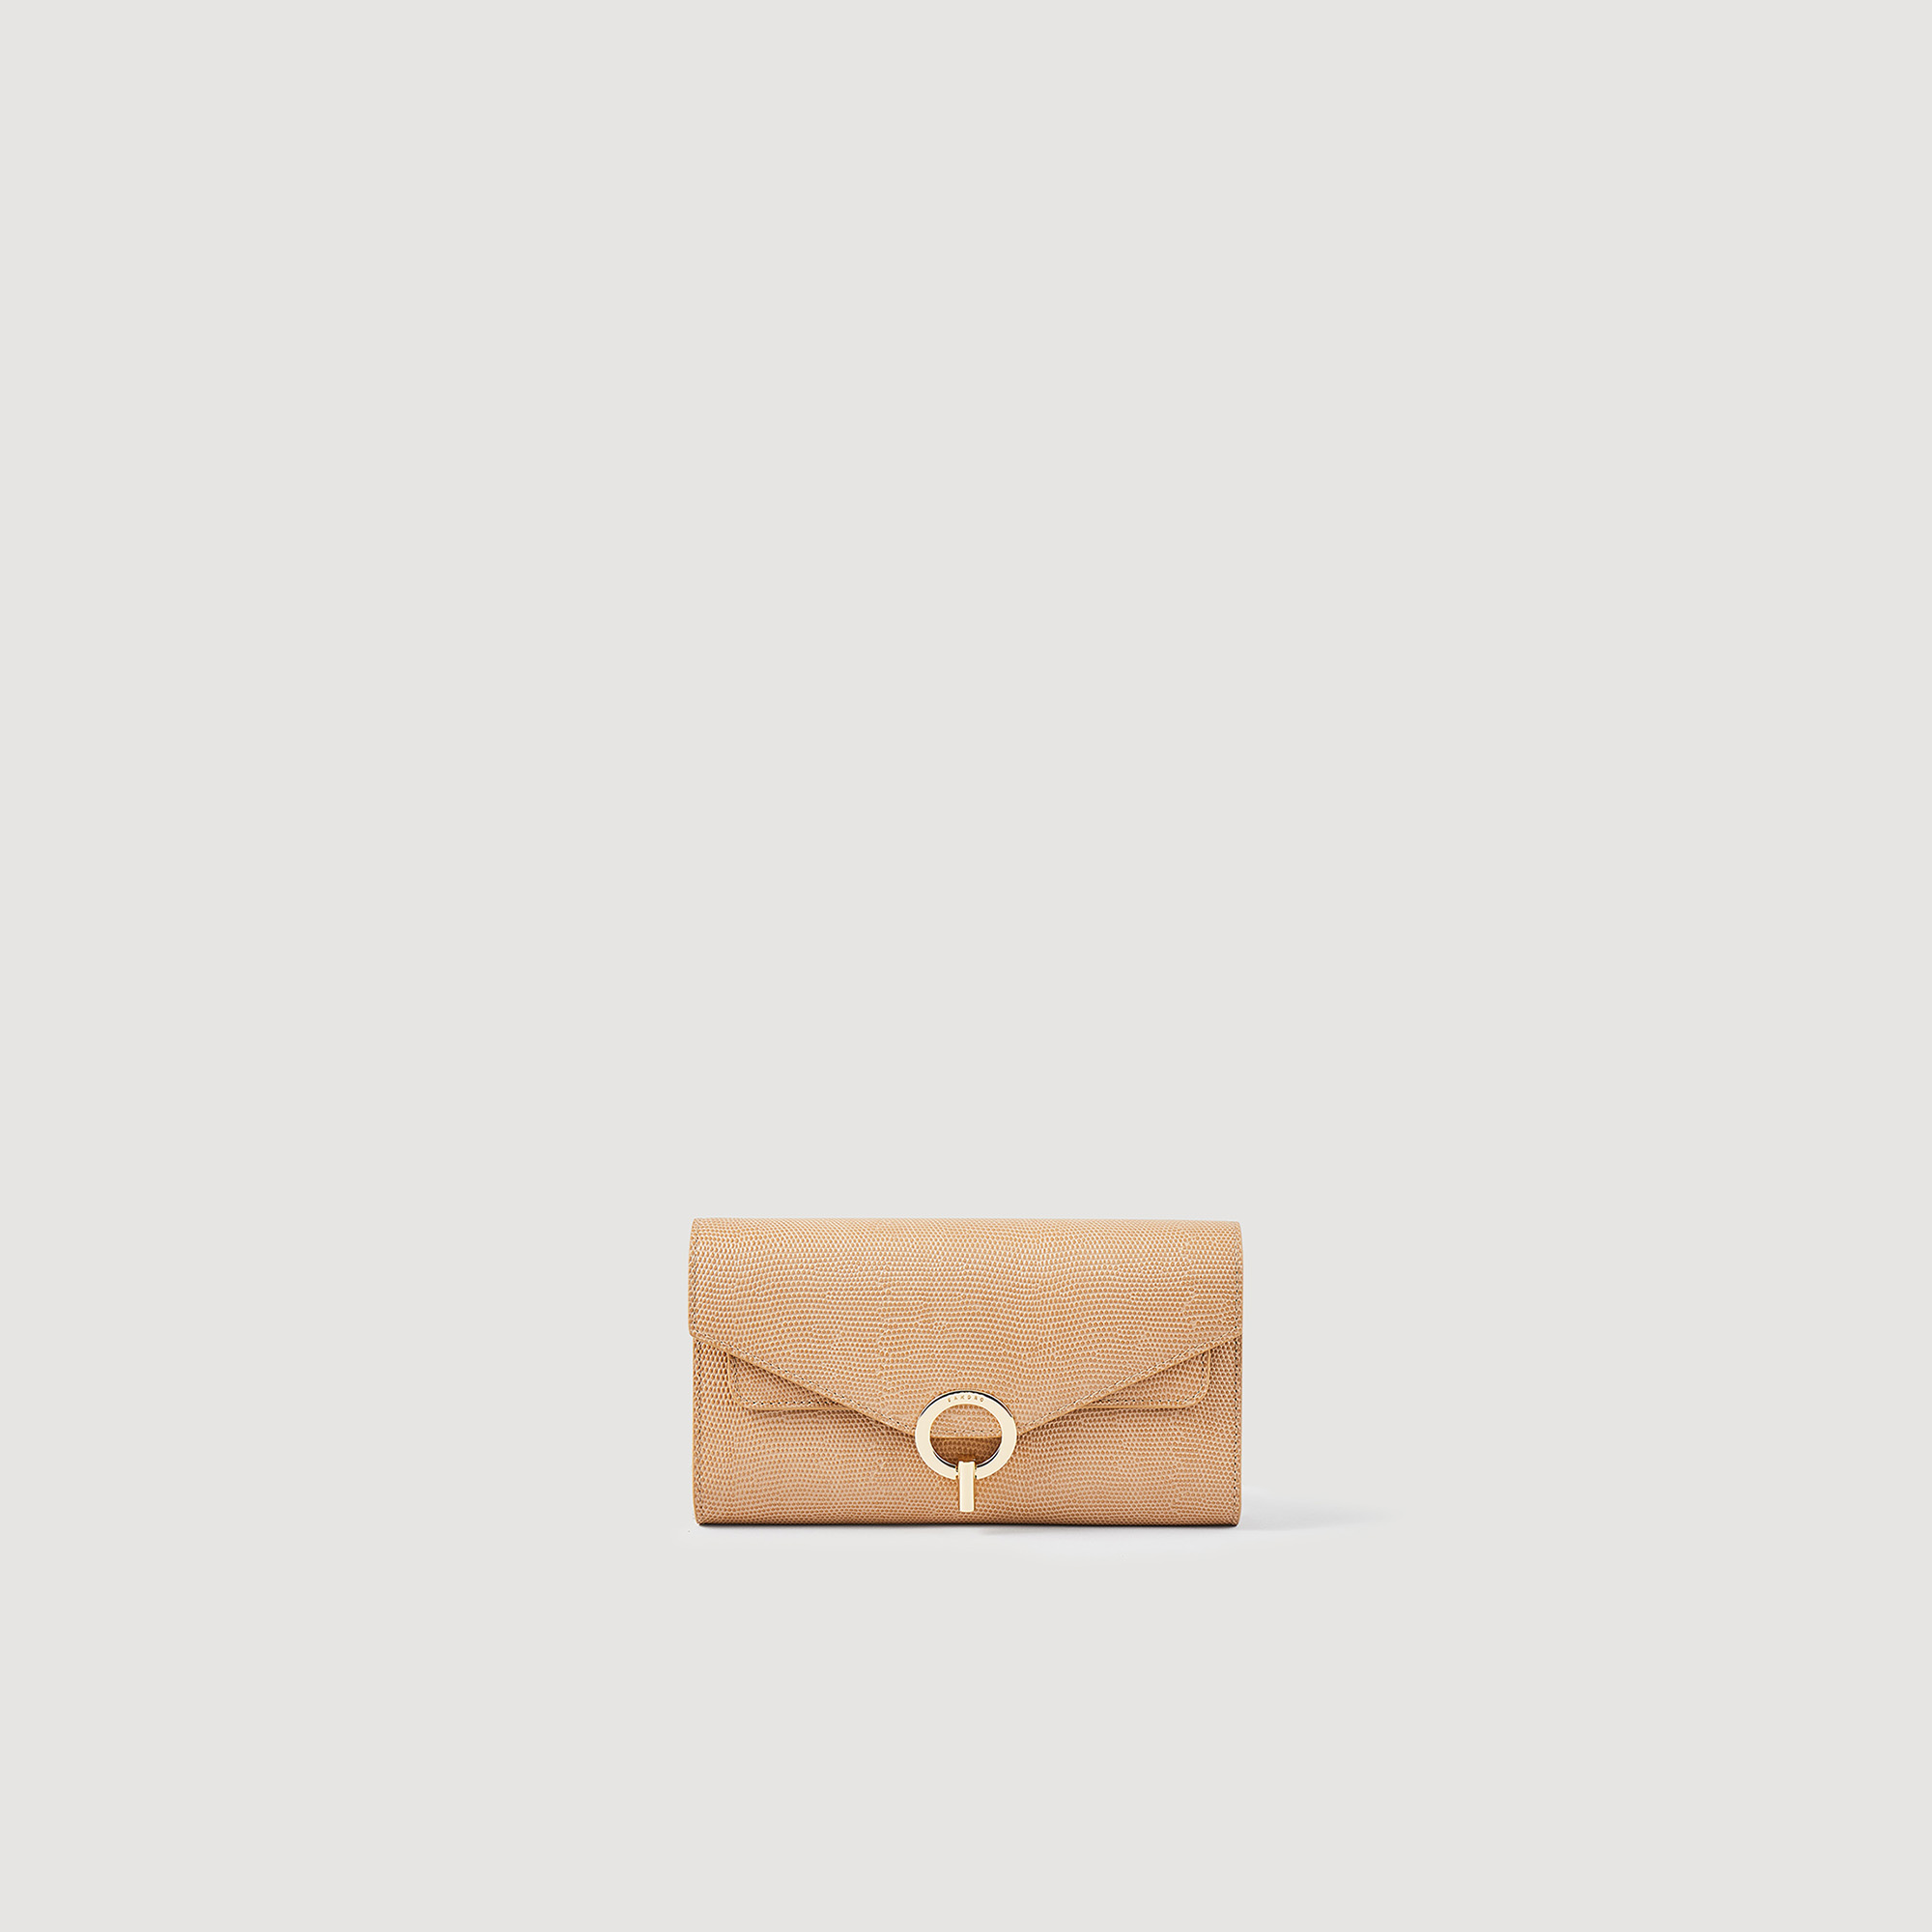 Sandro cotton Leather: calfskin Flap lining: The iconic Yza bag in a clutch version